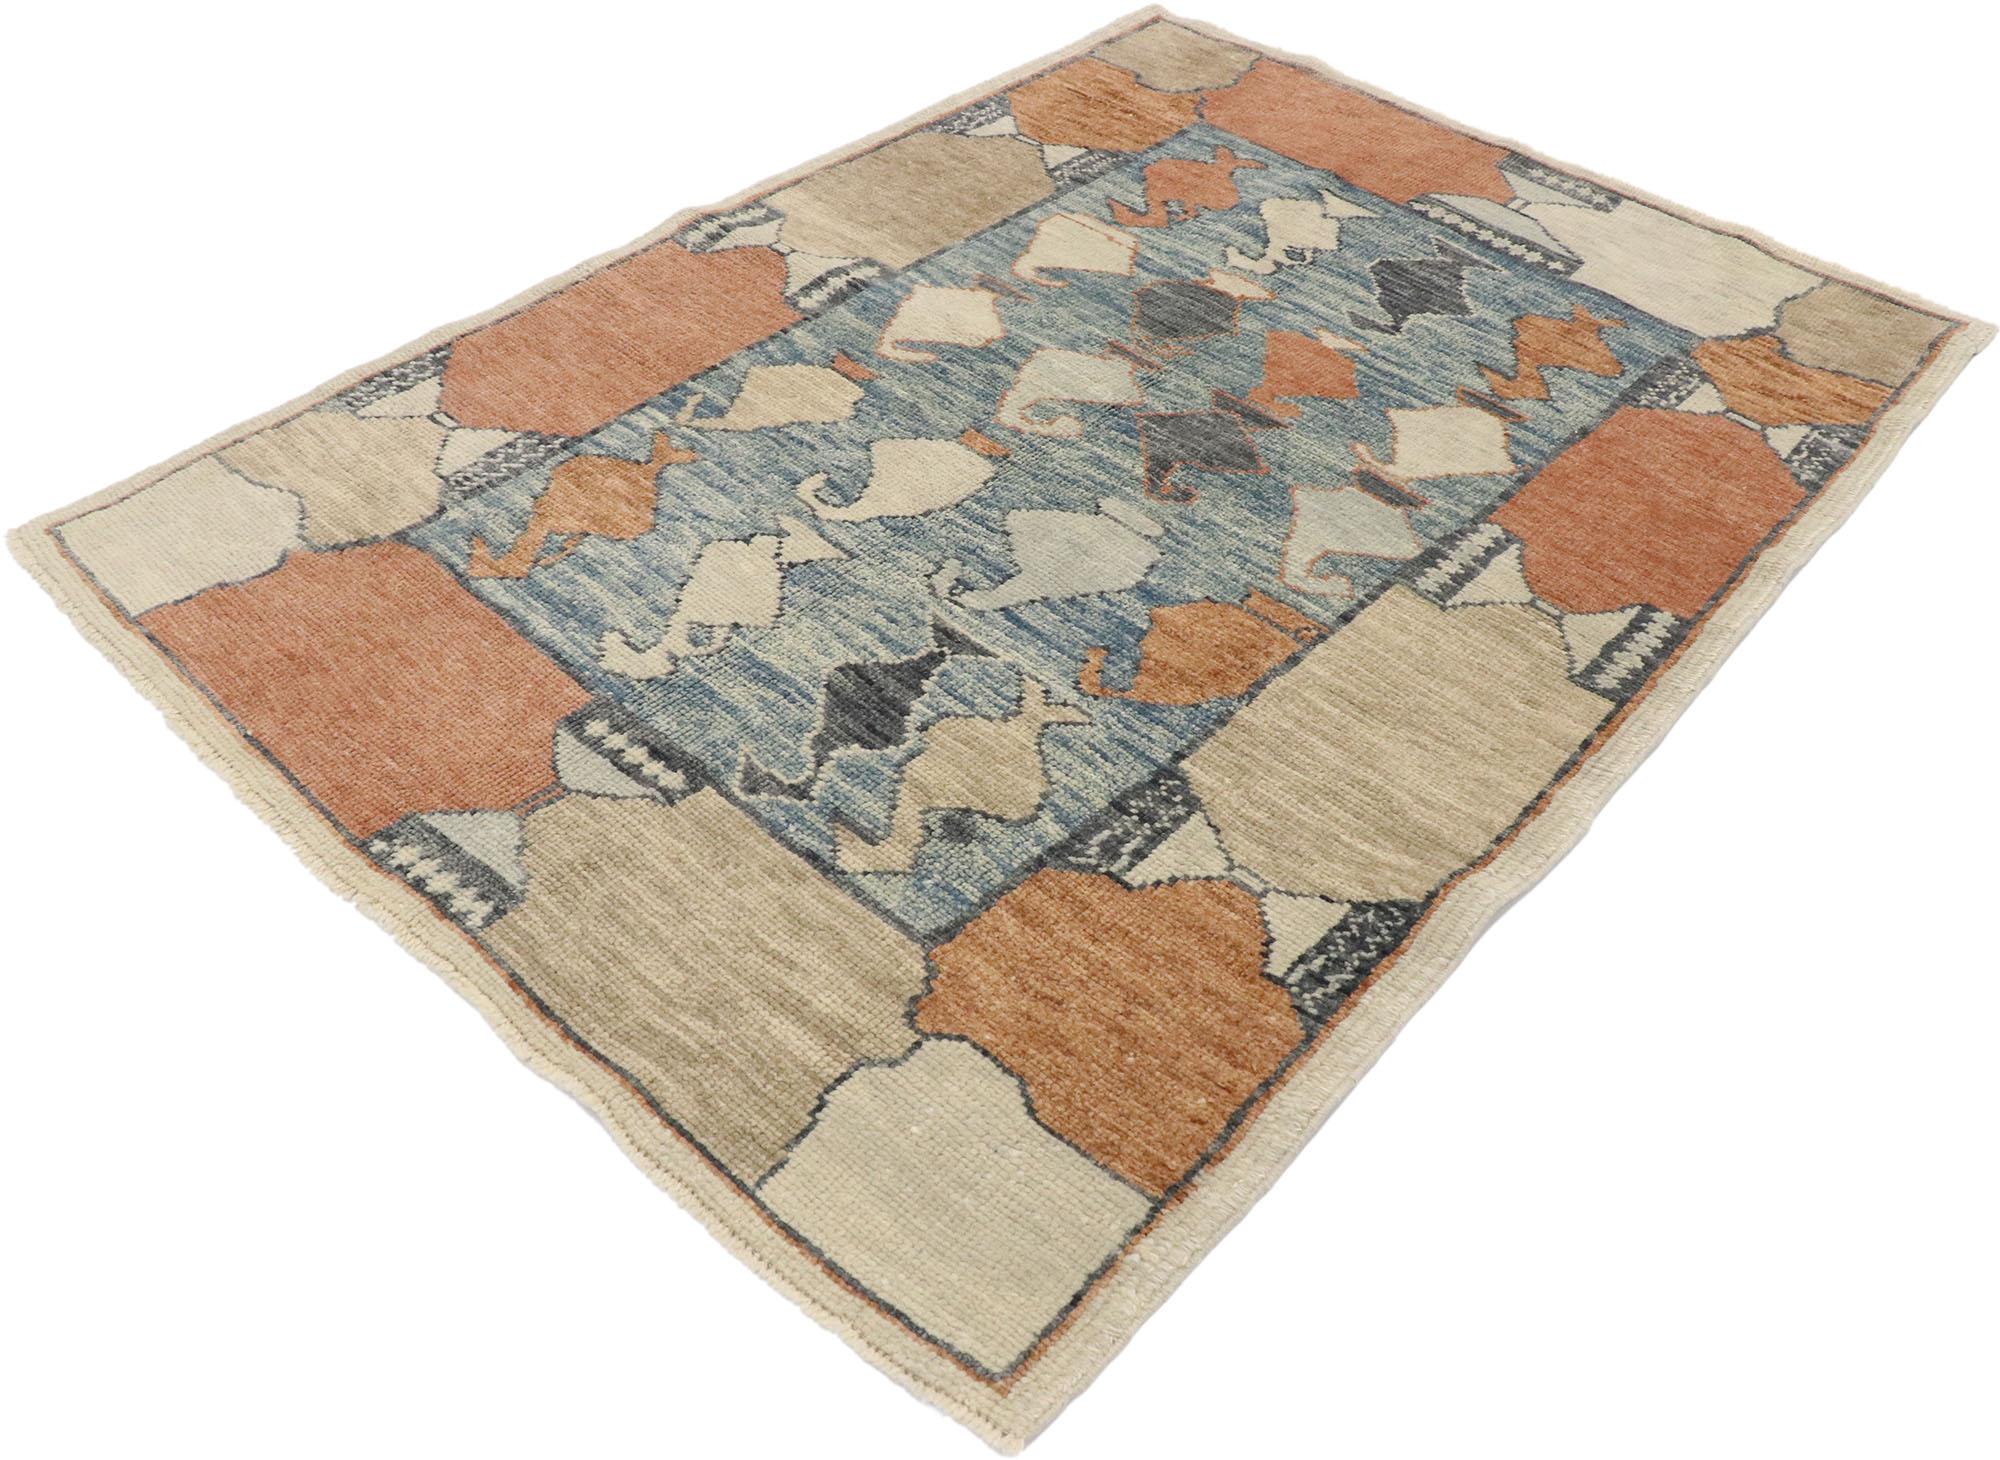 53383, new contemporary Turkish Oushak rug with Modern Rustic Italian style. With brilliant blues and warm terracotta hues inspired by Italy, this hand knotted wool contemporary Turkish Oushak rug beautifully embodies an Italian Rustic style. The